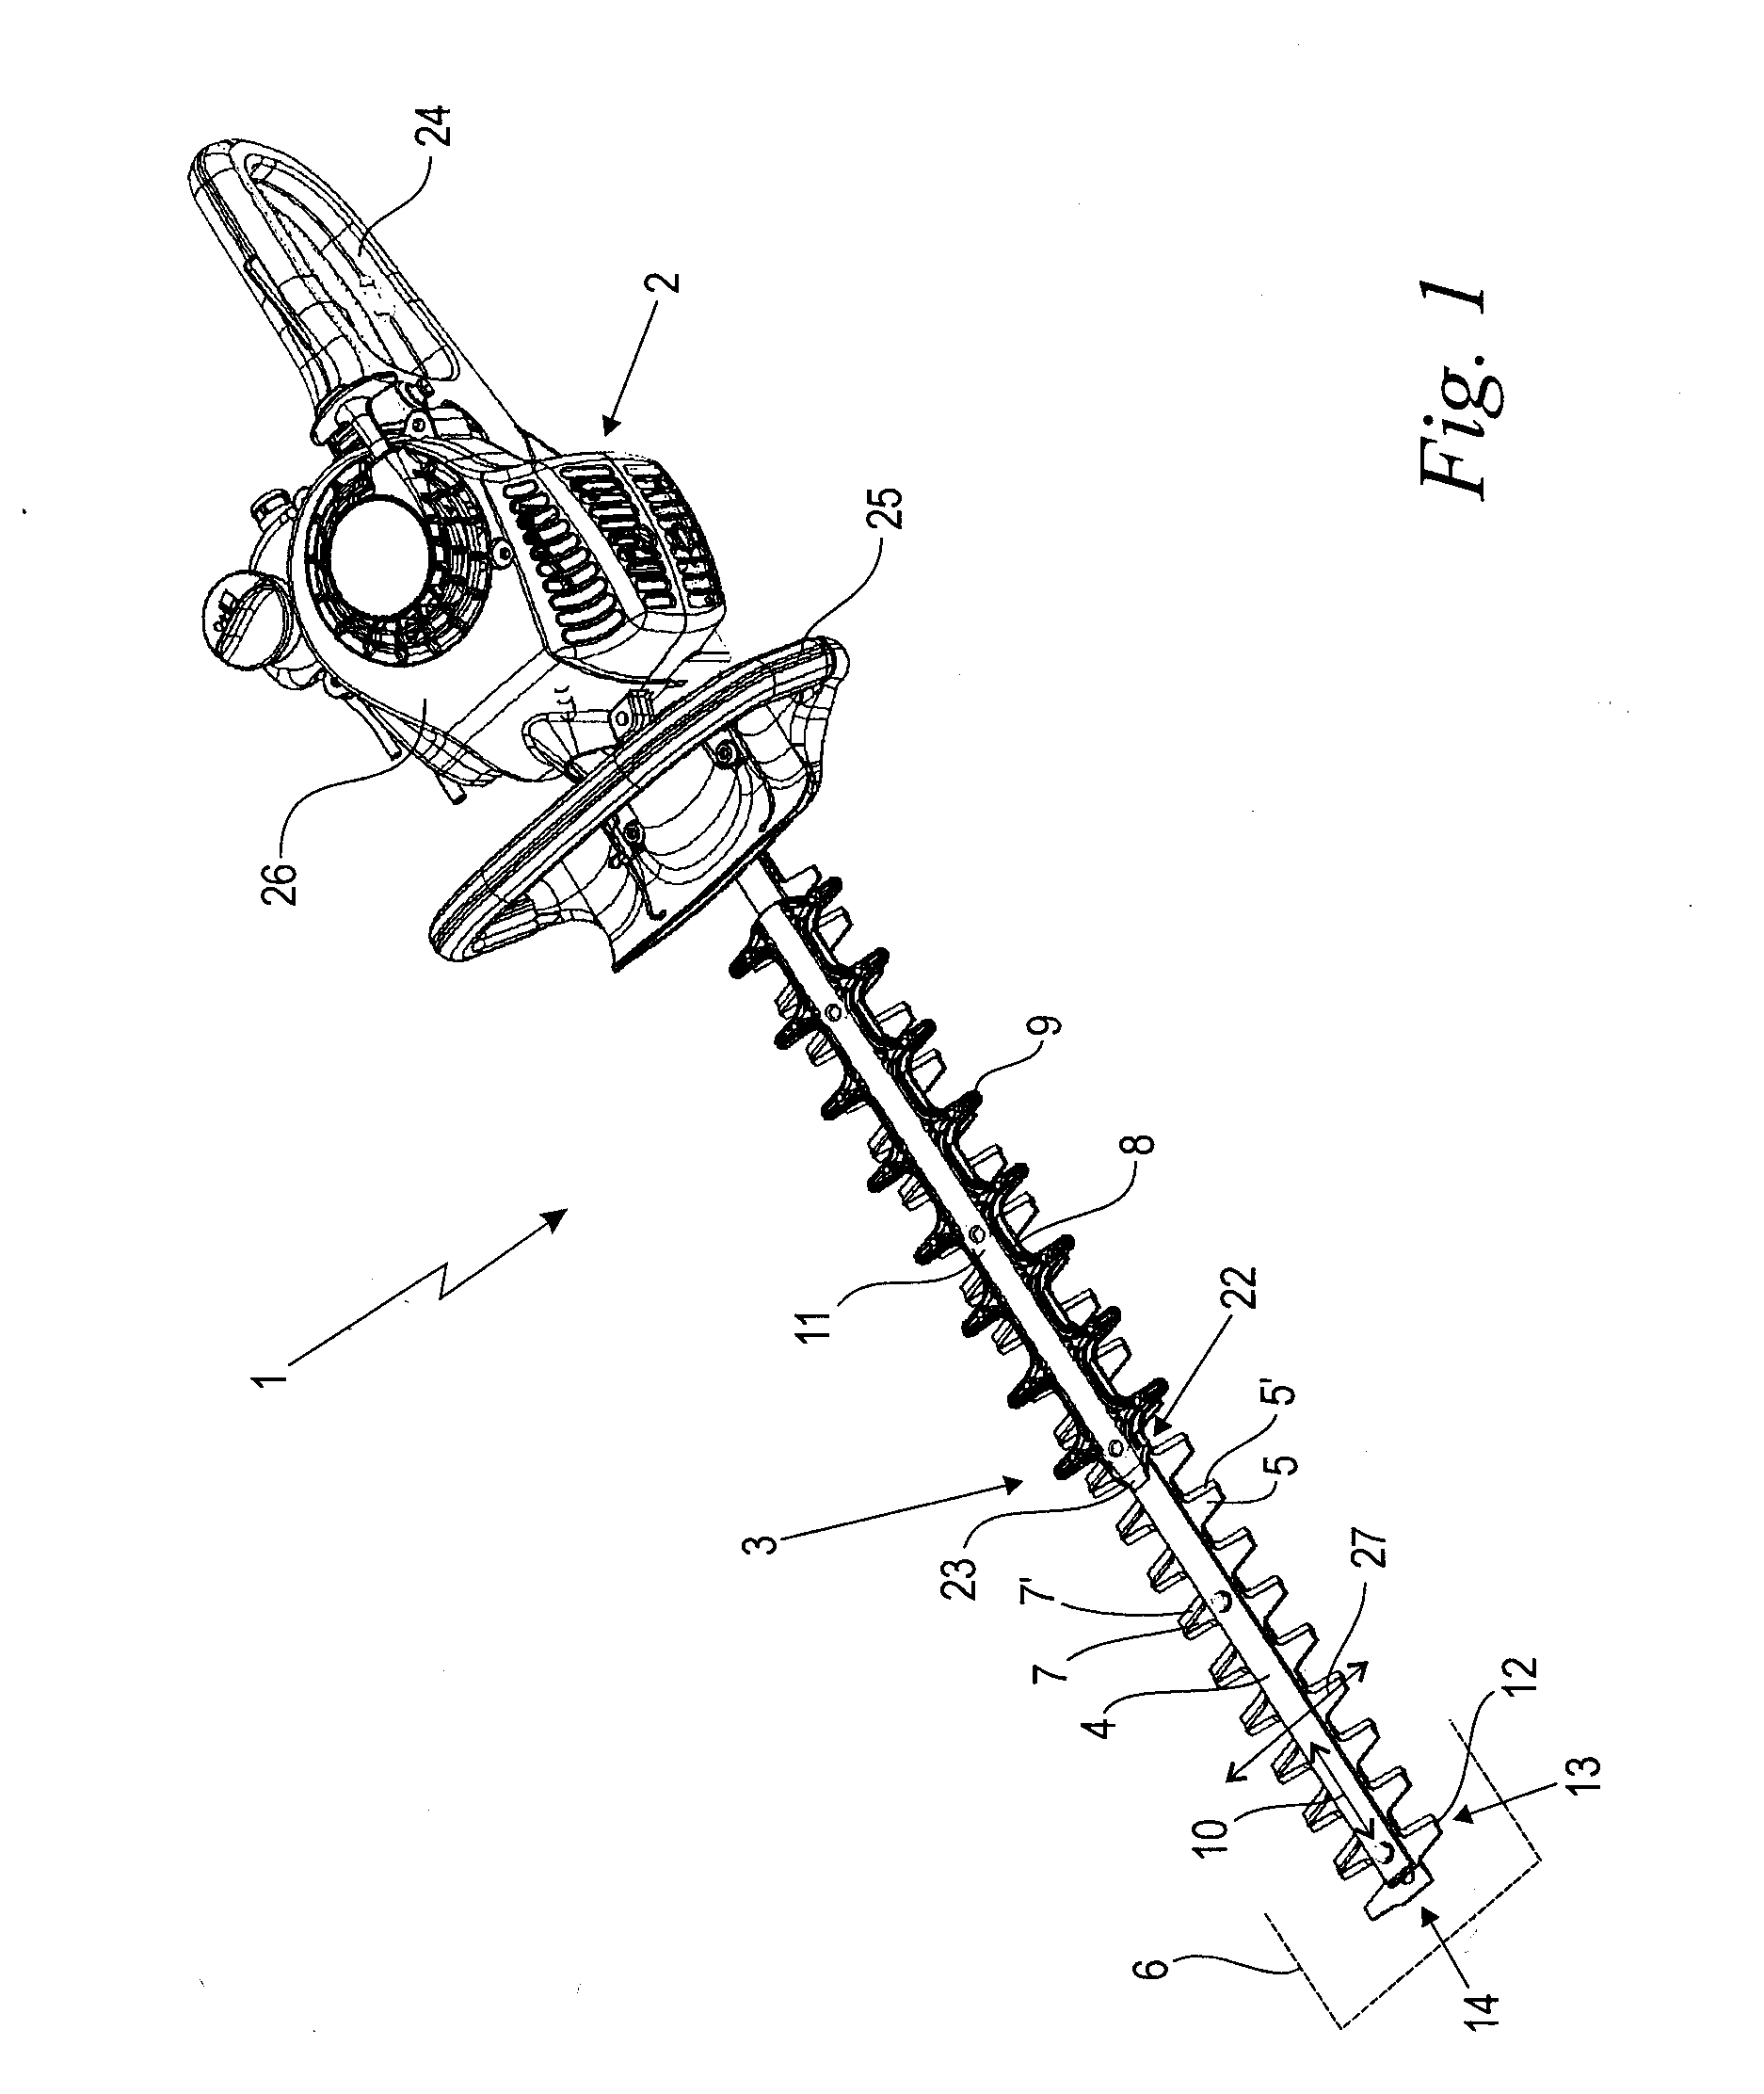 Cutter Bar of a Motor-Operated Hedge Trimmer